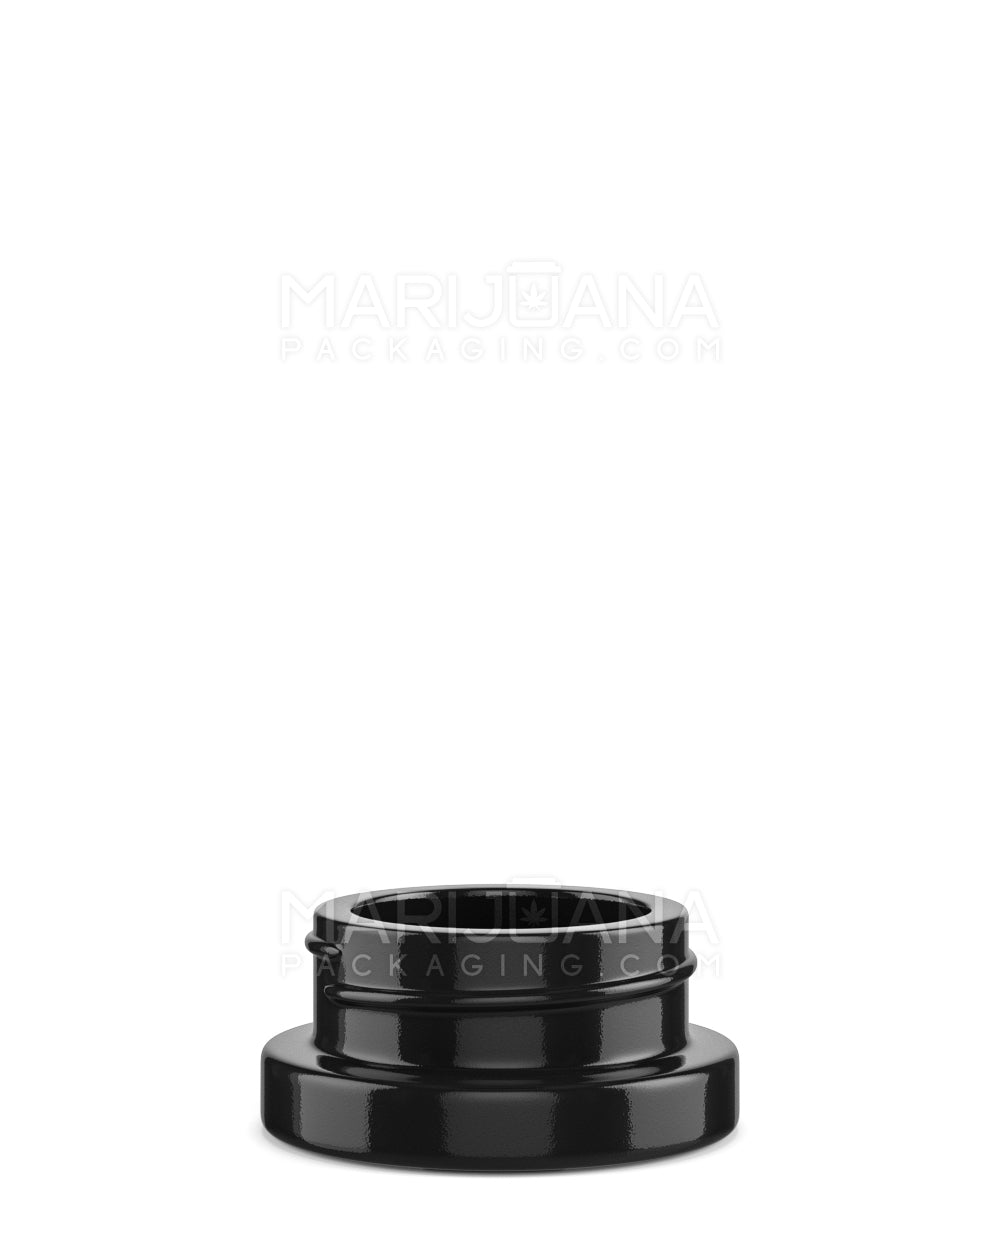 Child Resistant | Black Glass Concentrate Jar with Black Cap | 38mm - 9mL - 320 Count - 2